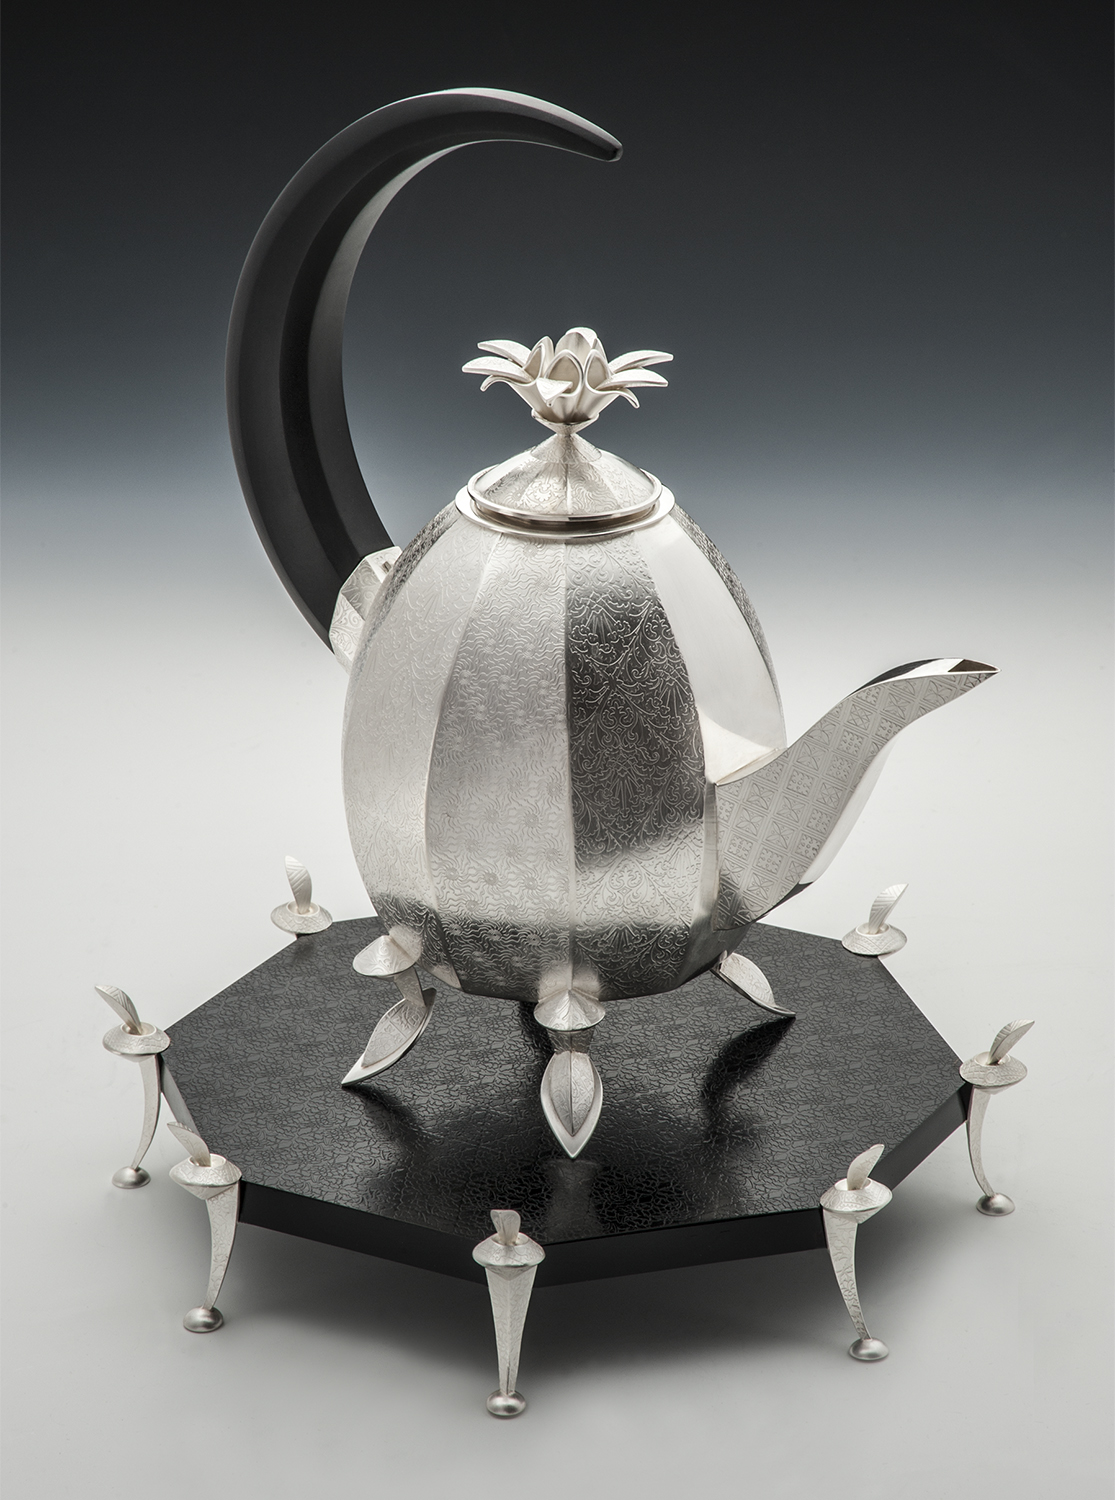 Slippers Teapot  |  2000  |  sterling silver, maple, micarta  |  13 x 10 x 10 inches